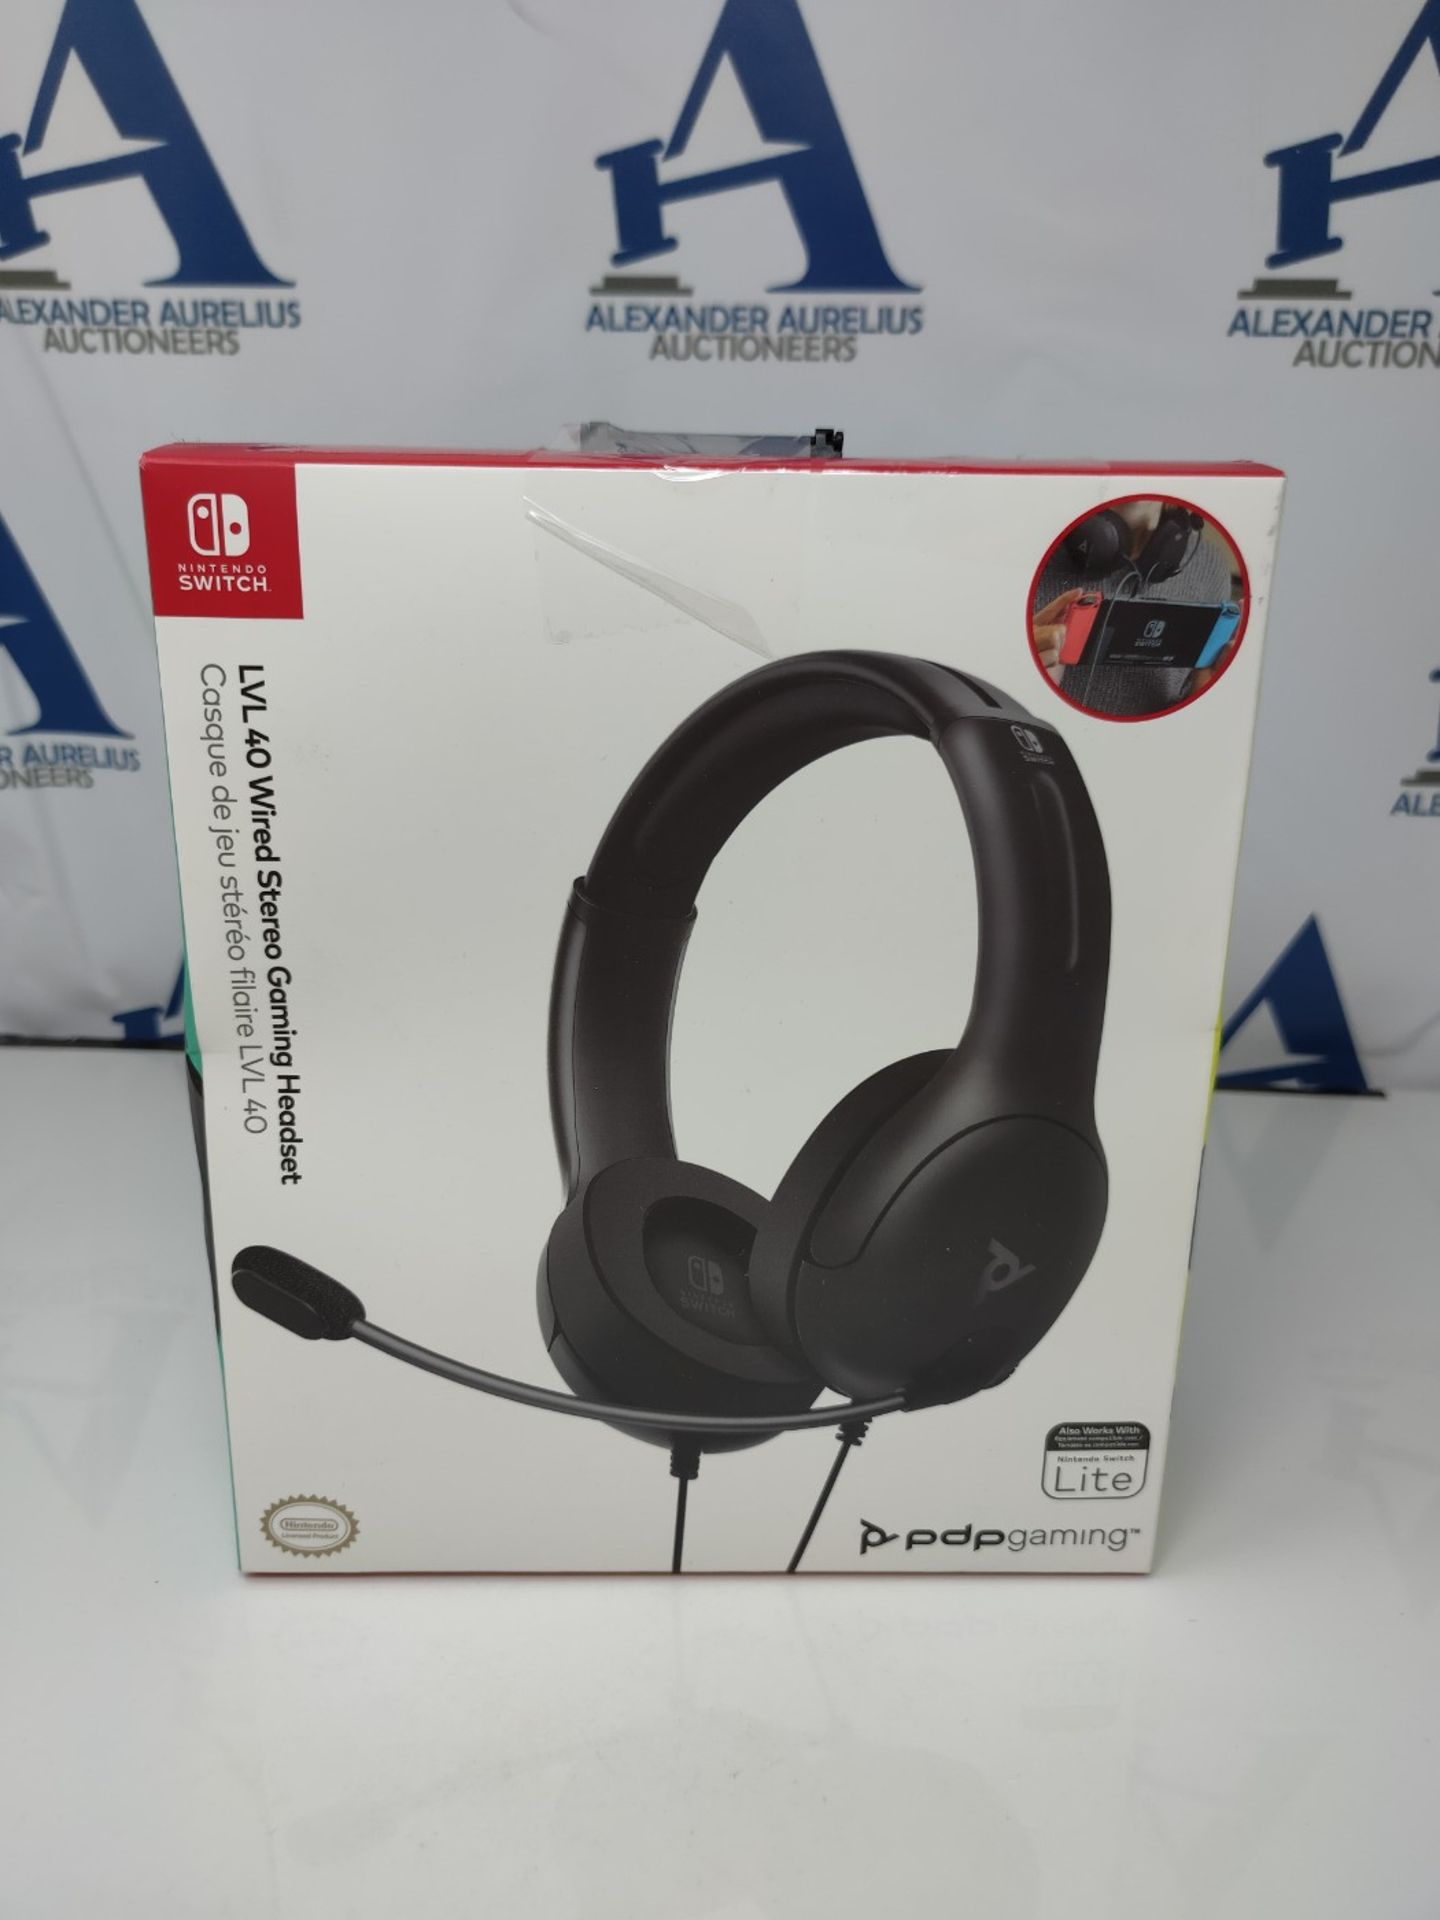 PDP Gaming LVL40 Stereo Headset with Mic for Nintendo Switch - PC, iPad, Mac, Laptop C - Image 2 of 3